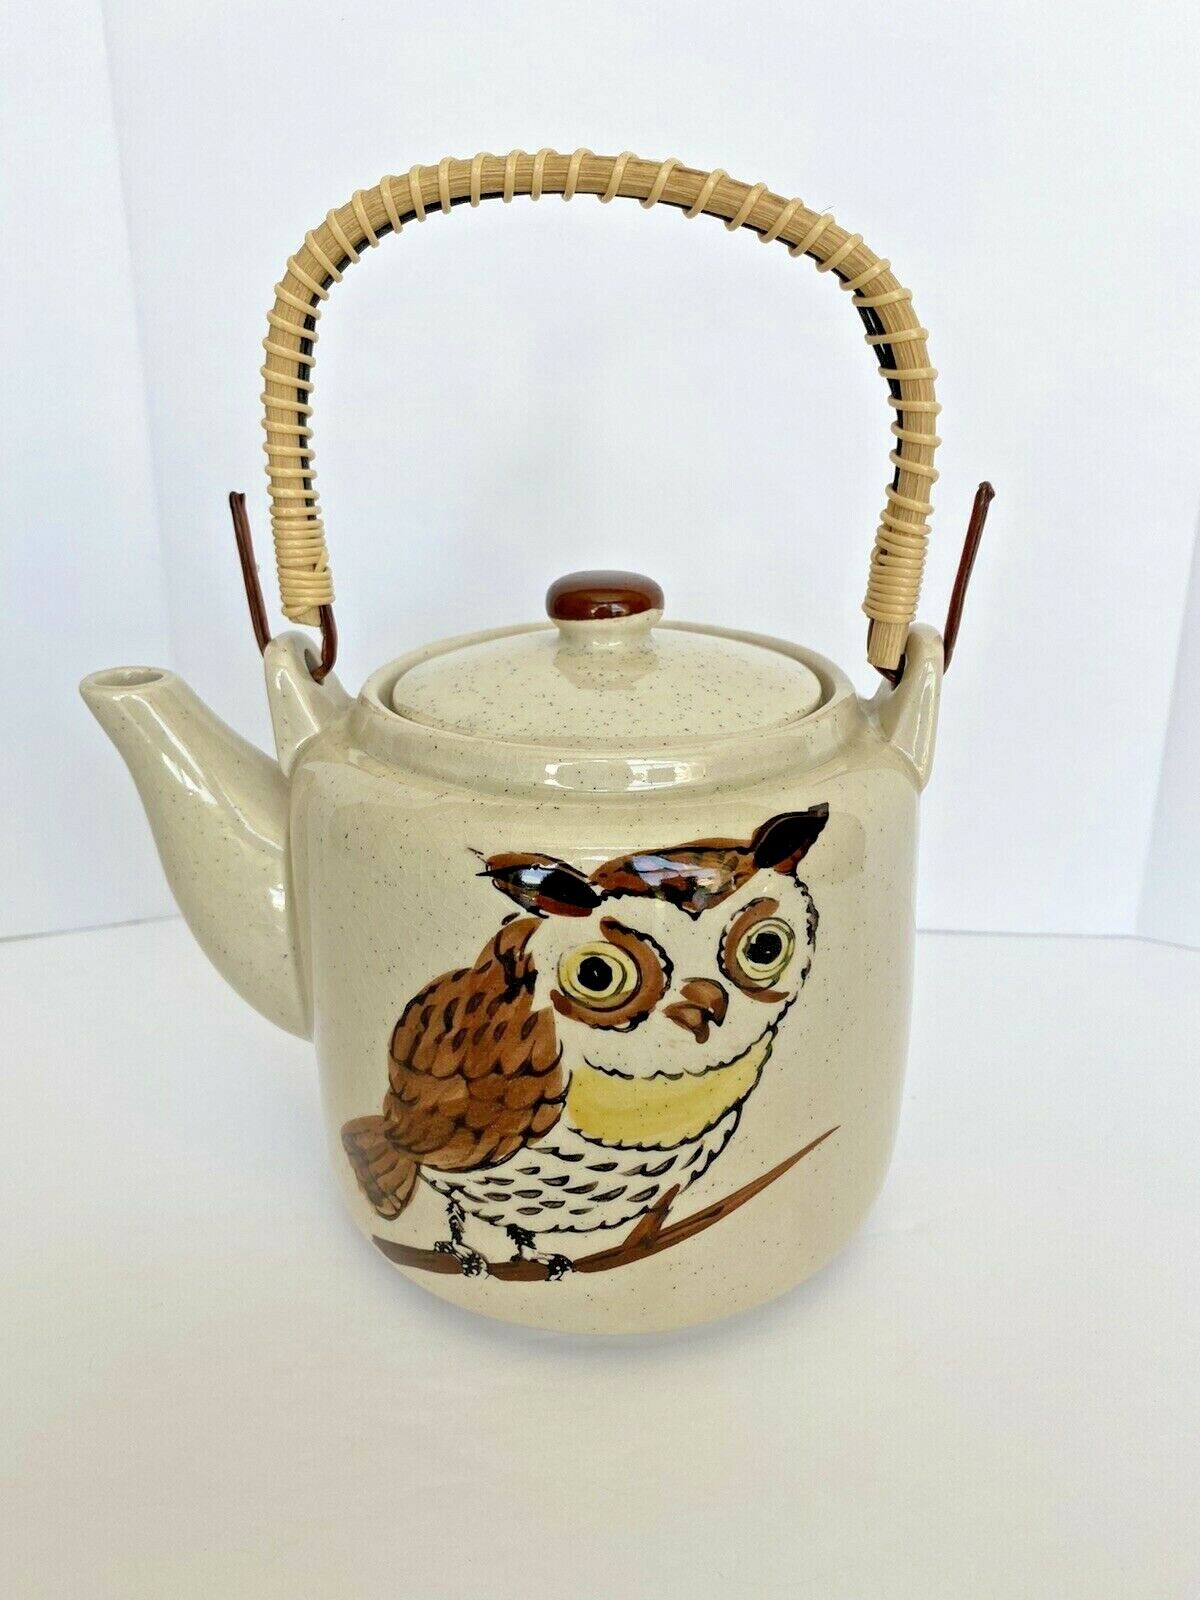 Speckled Ceramic Teapot With Hand-painted Owl And Bamboo Handle Vintage